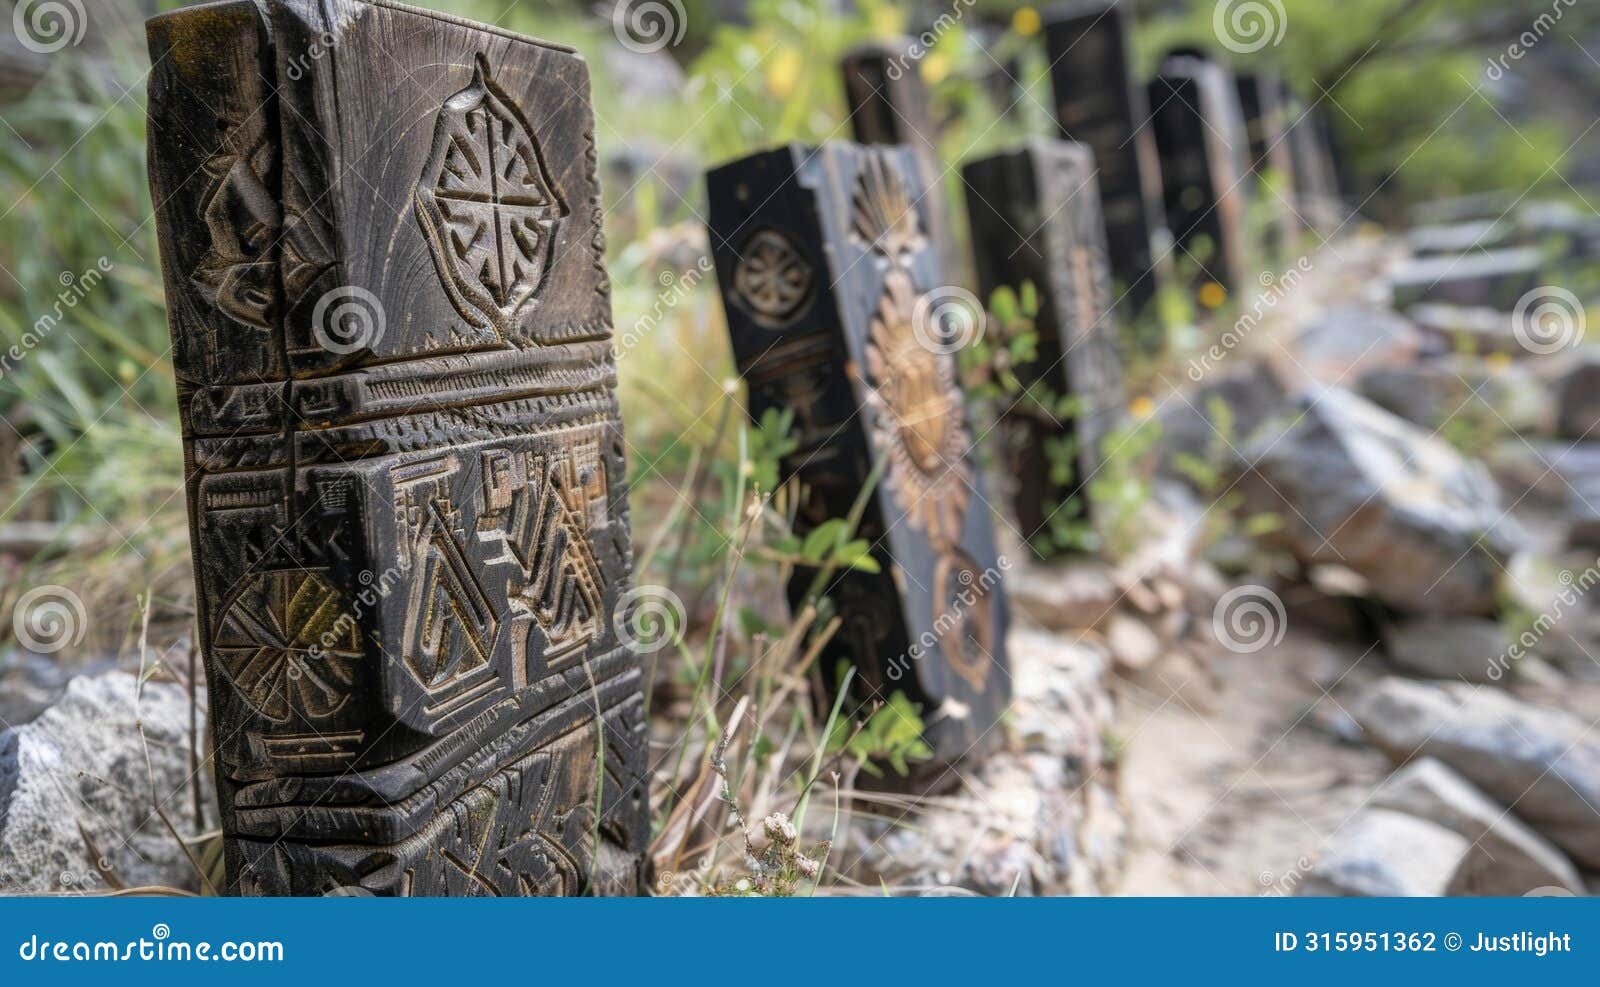 the wooden grave markers are etched with cryptic s and religious engravings adding to the mystery of the cemetery.